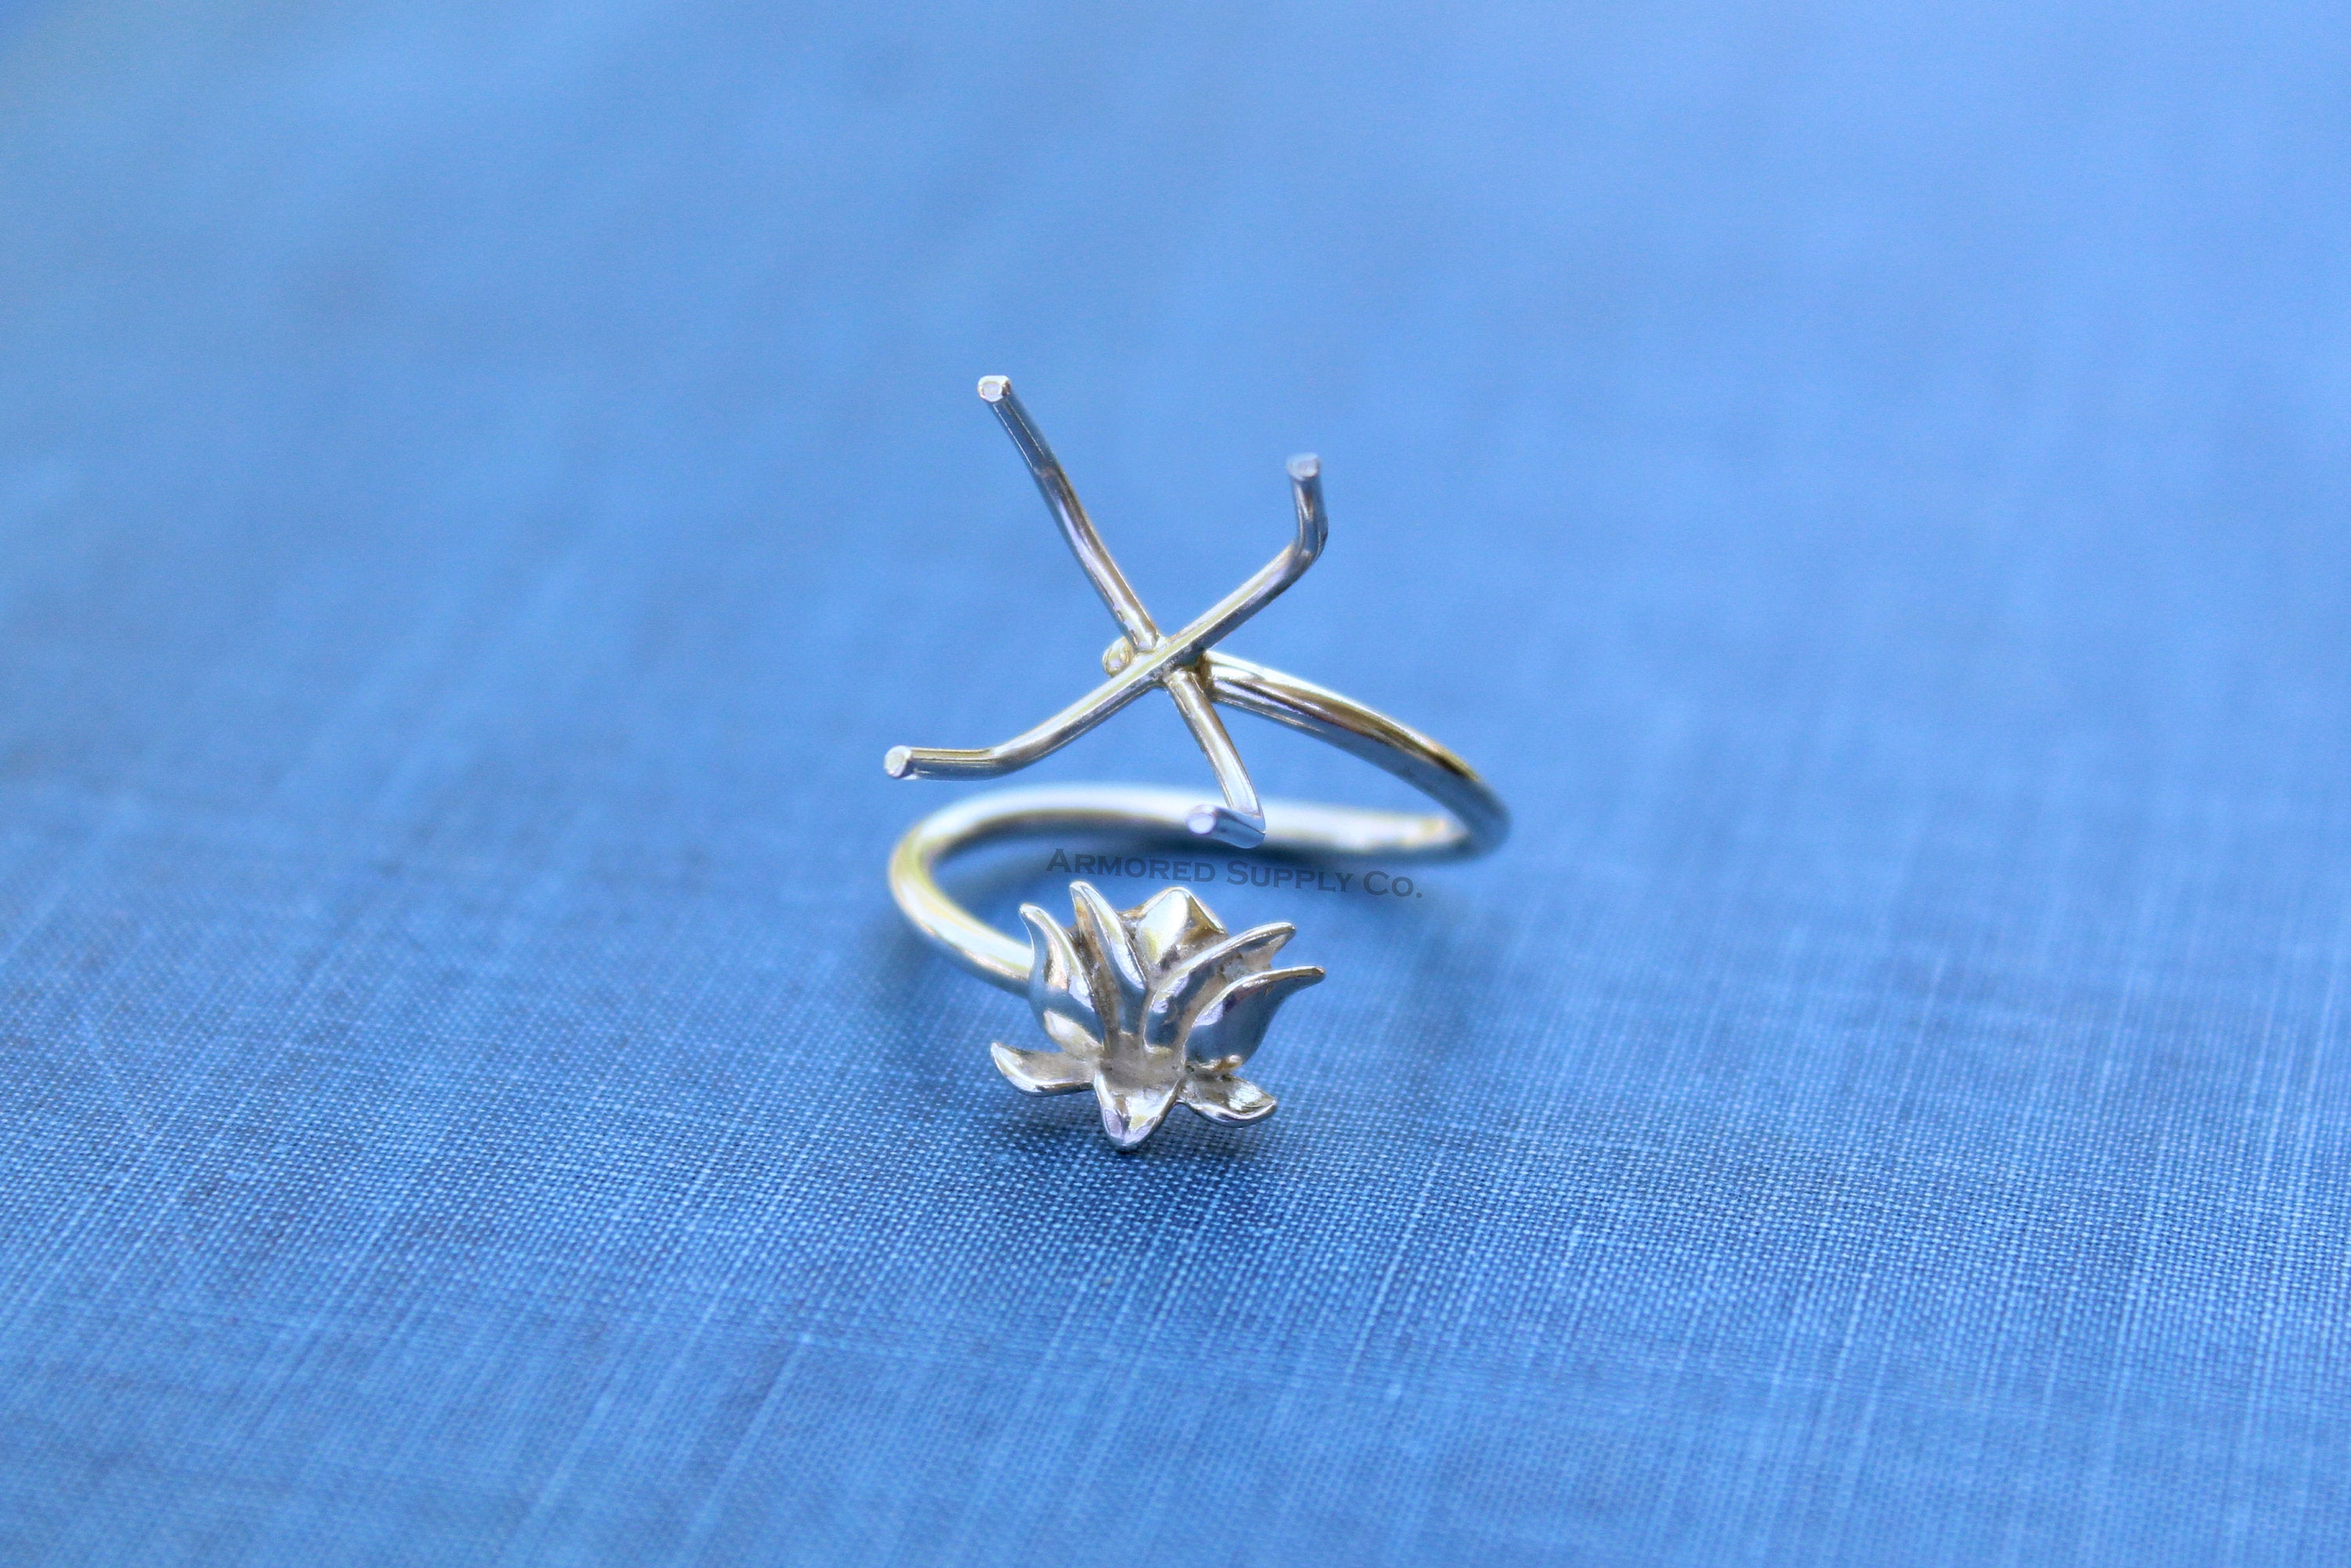 Silver Lotus Adjustable Claw Prong Ring blank, Claw Ring Setting, Breast Milk DIY jewelry supplies, build a ring, wholesale jewelry